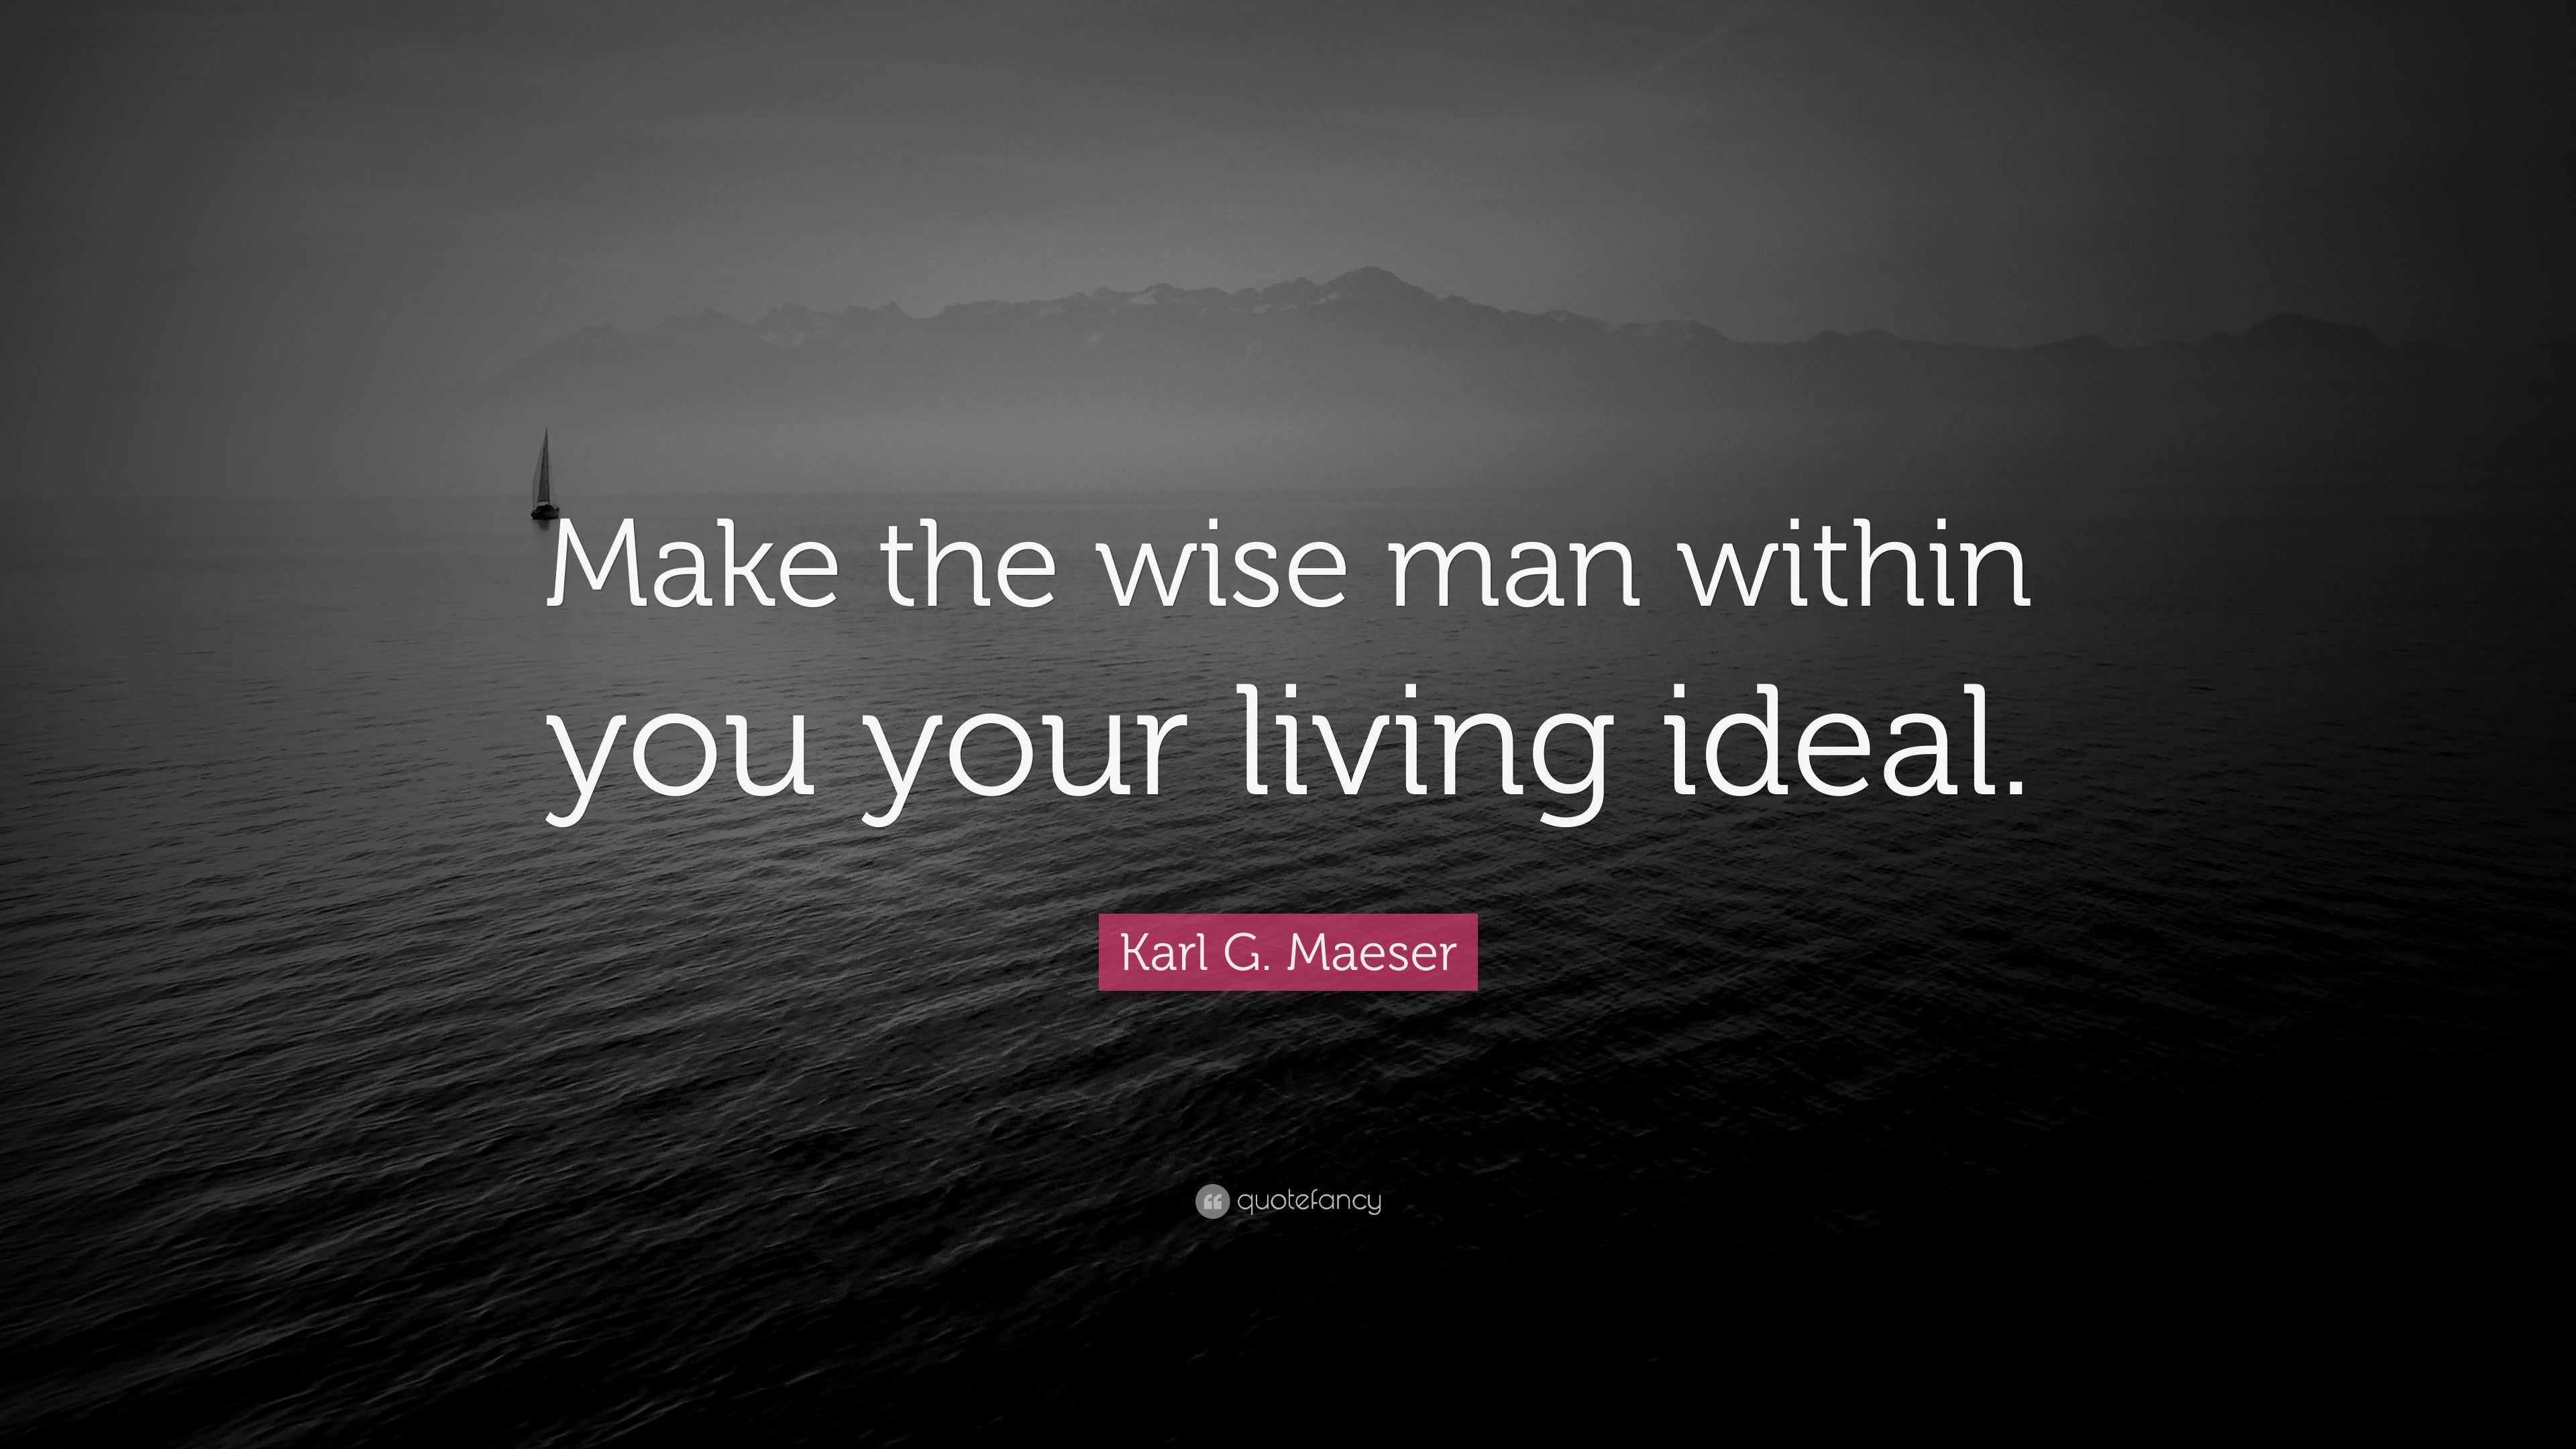 Karl G. Maeser Quote: “Make the wise man within you your living ideal.”